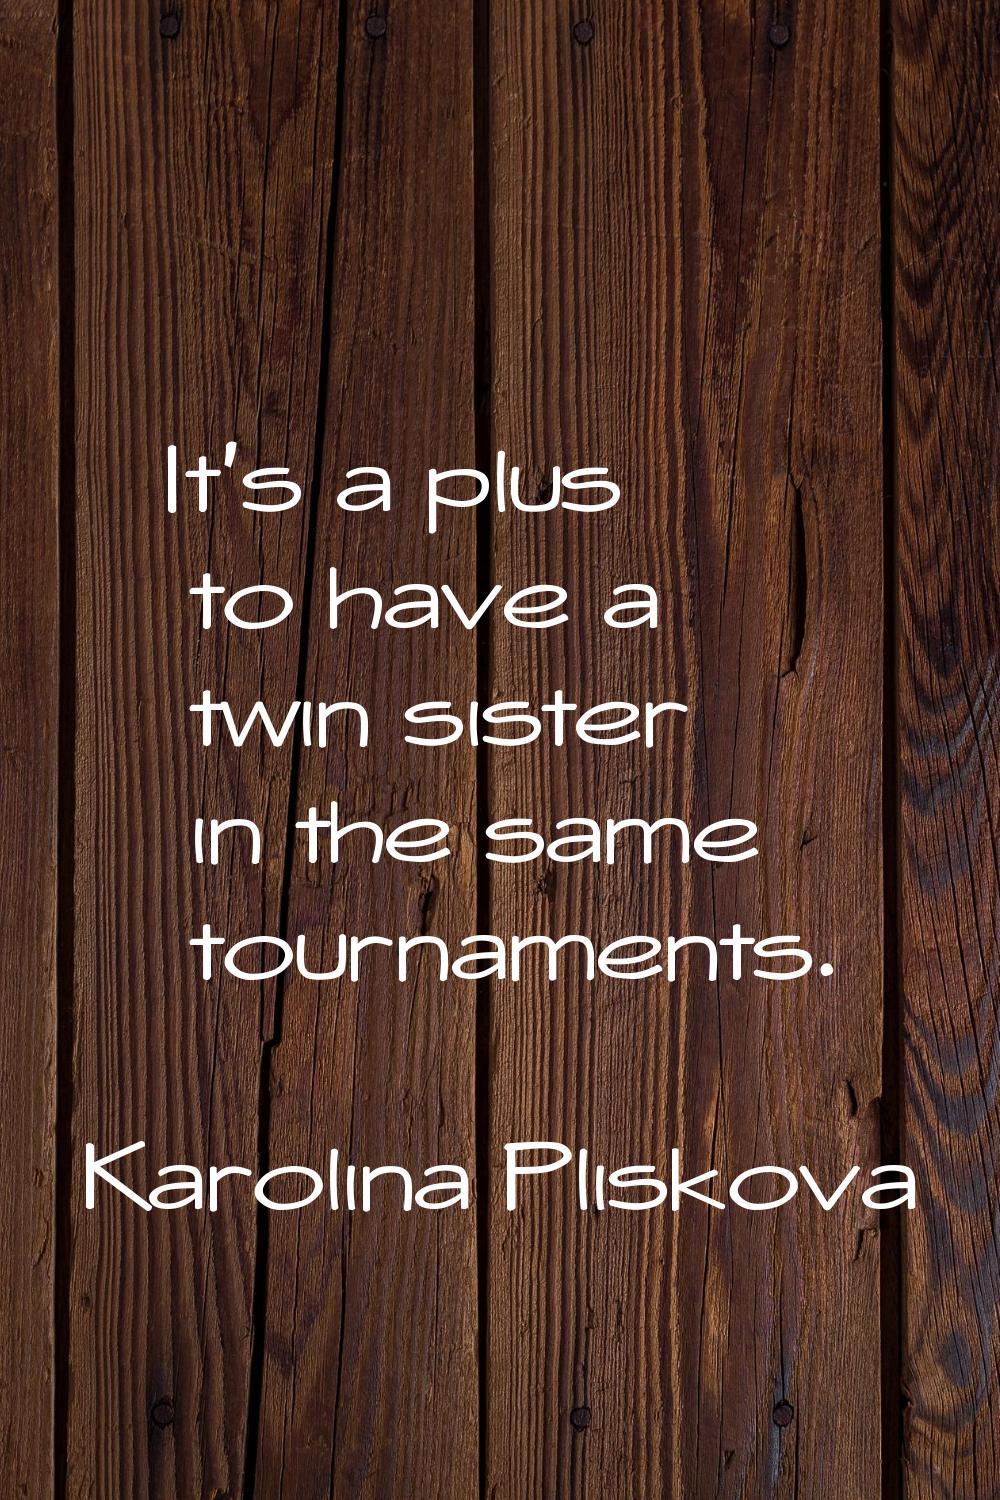 It's a plus to have a twin sister in the same tournaments.